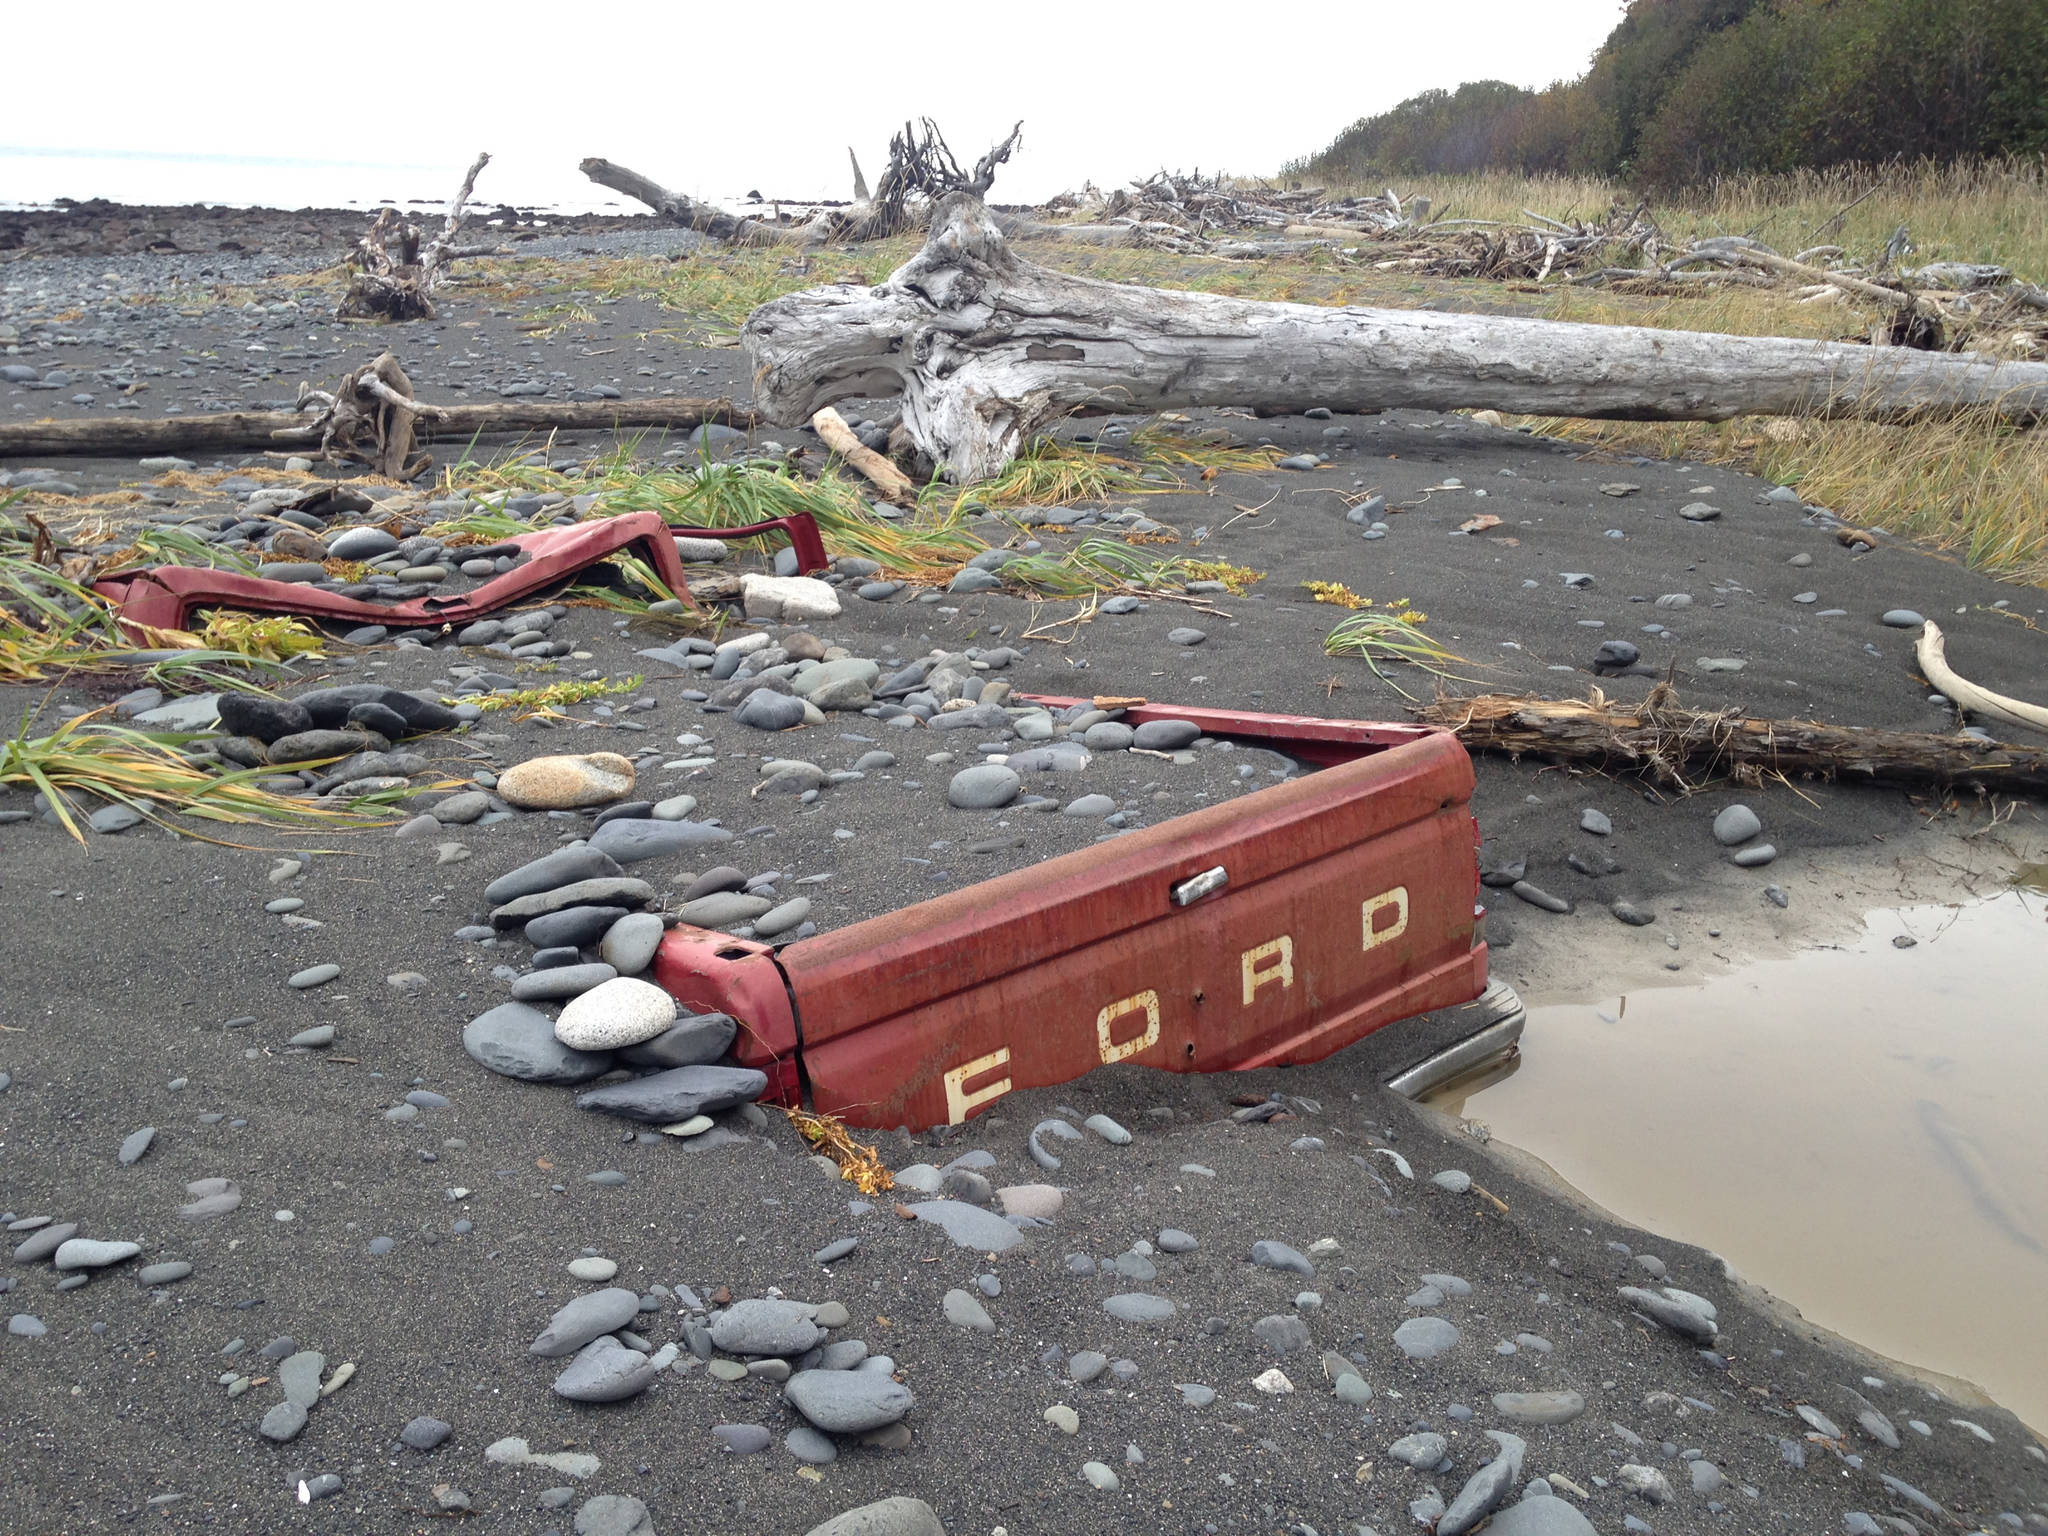 Storm tides have almost totally buried a Ford F-150 pickup truck on the beach south of Diamond Creek in this photo taken on Sunday, Oct. 14, 2018, near Homer, Alaska. The truck was abandoned on the beach in October 2011 and had then been on its tires. (Photo by Michael Armstrong/Homer News)